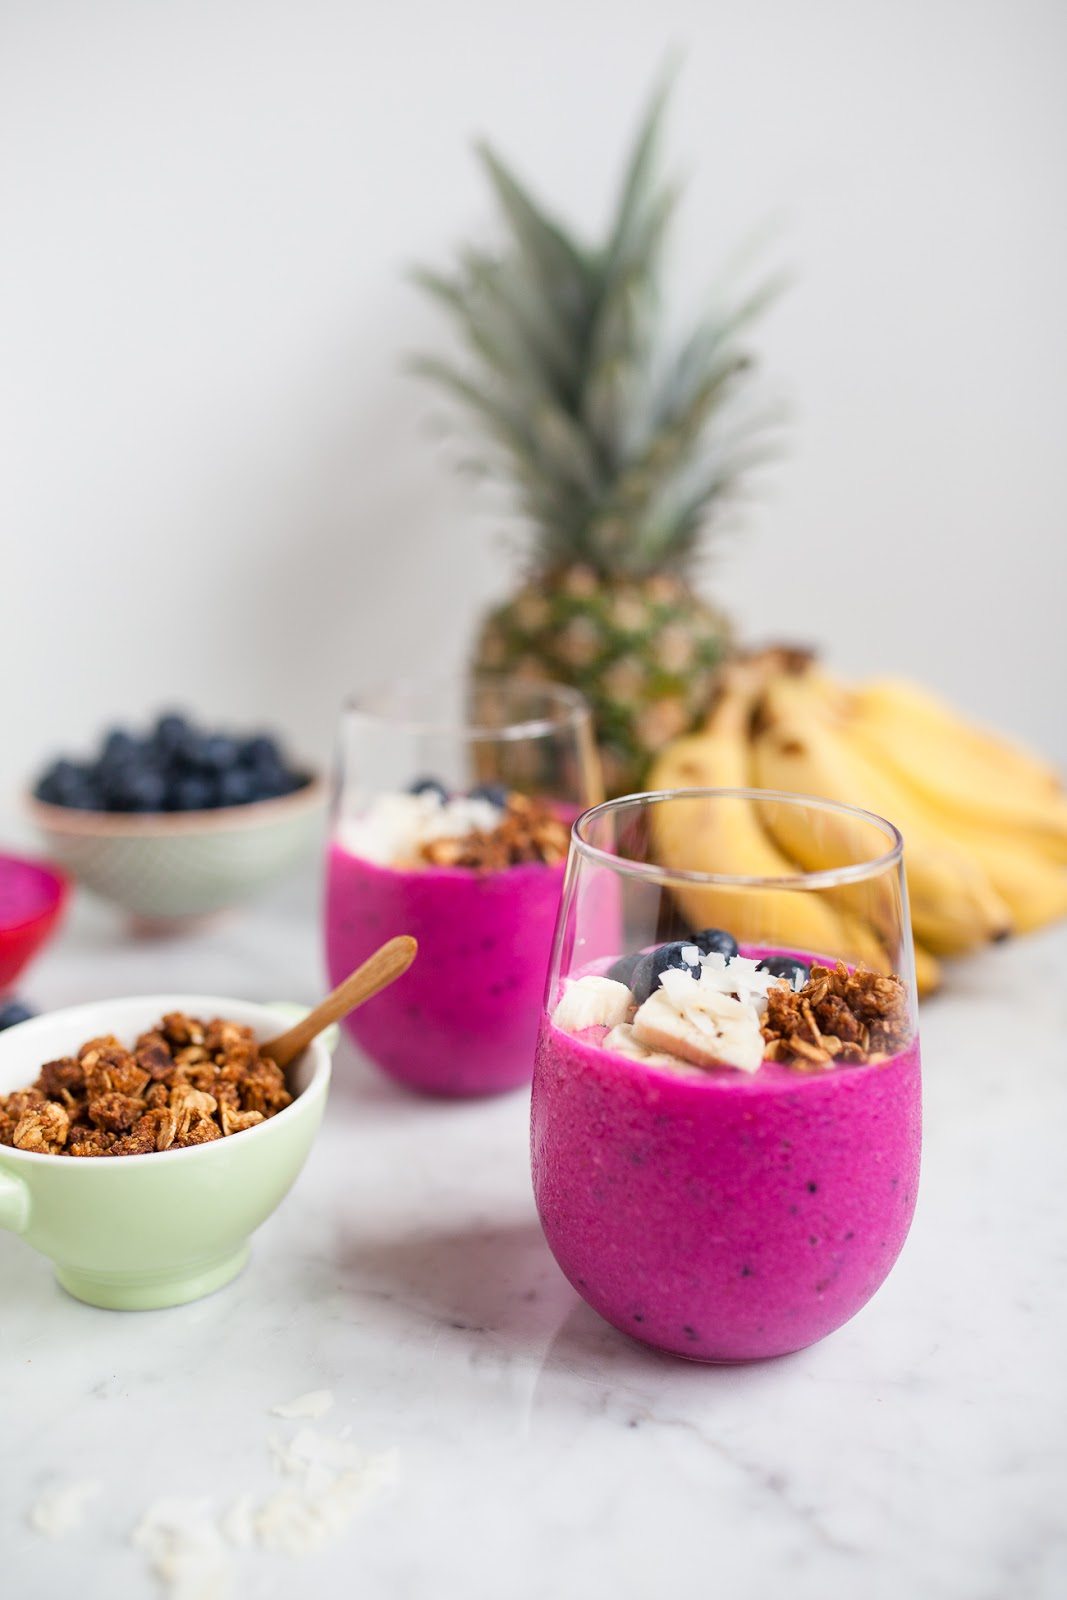 Dragon Fruit Smoothie Recipe | 12 Summer Smoothies plus loads of party recipes, entertaining tips, cocktail recipes and more from @cydconverse